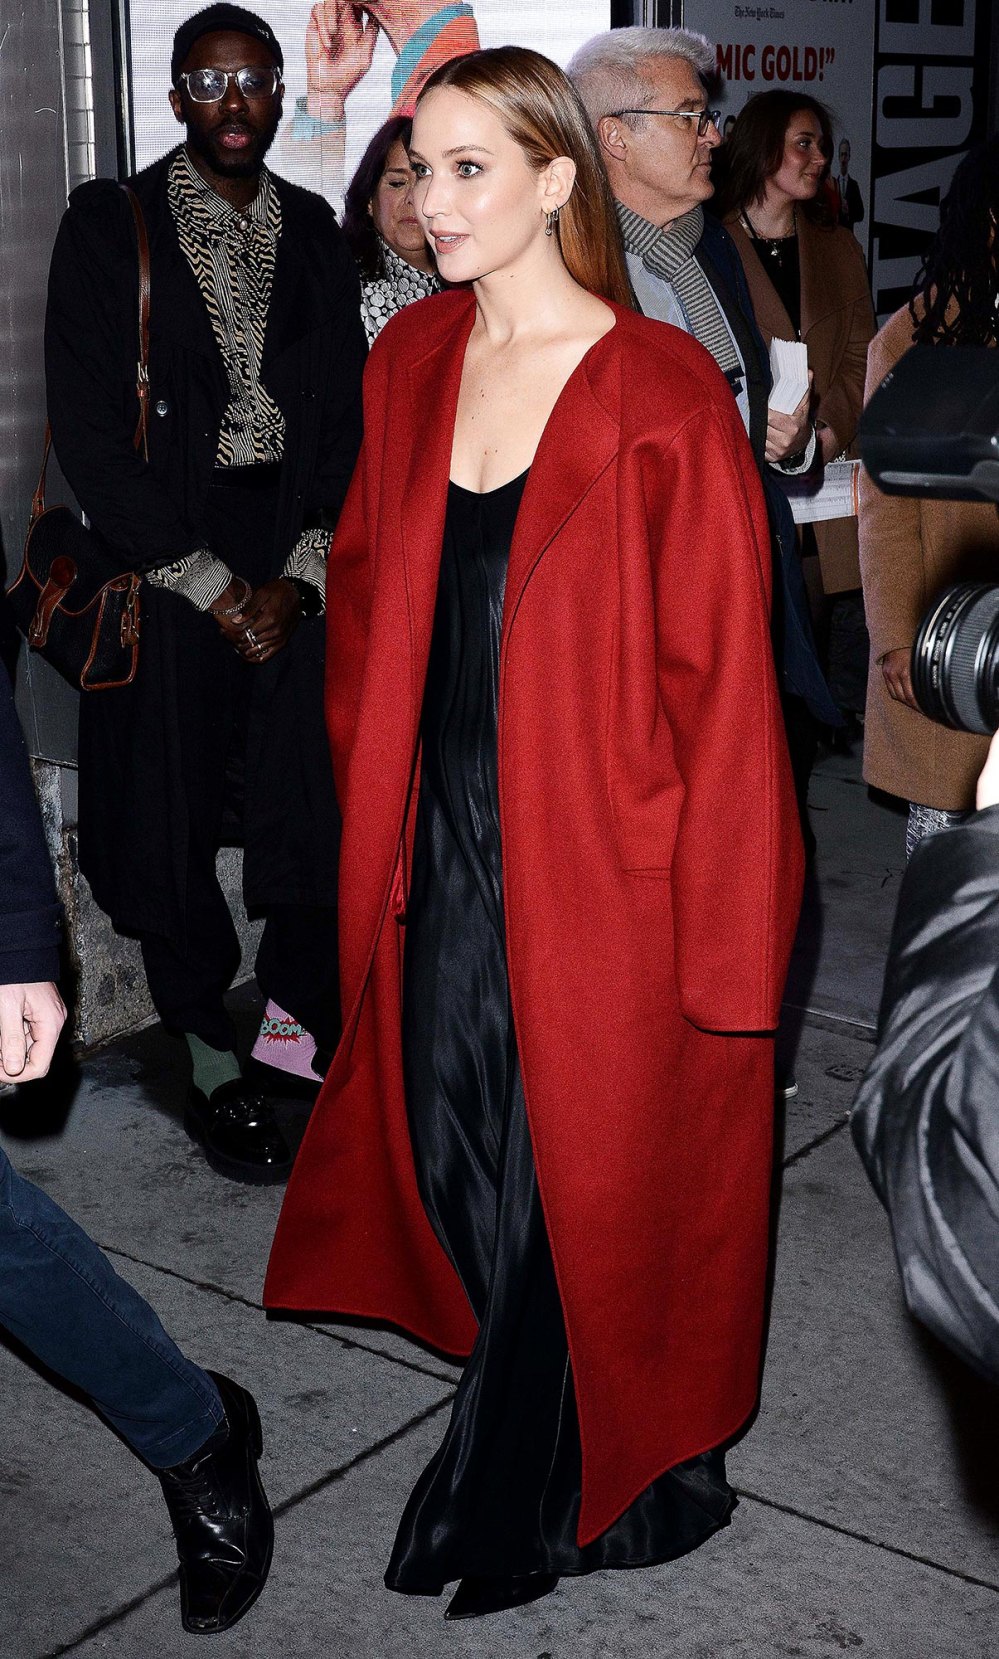 Jennifer Lawrence Dons a Festive Pop of Red to the Opening Night of Broadway’s ‘Appropriate’